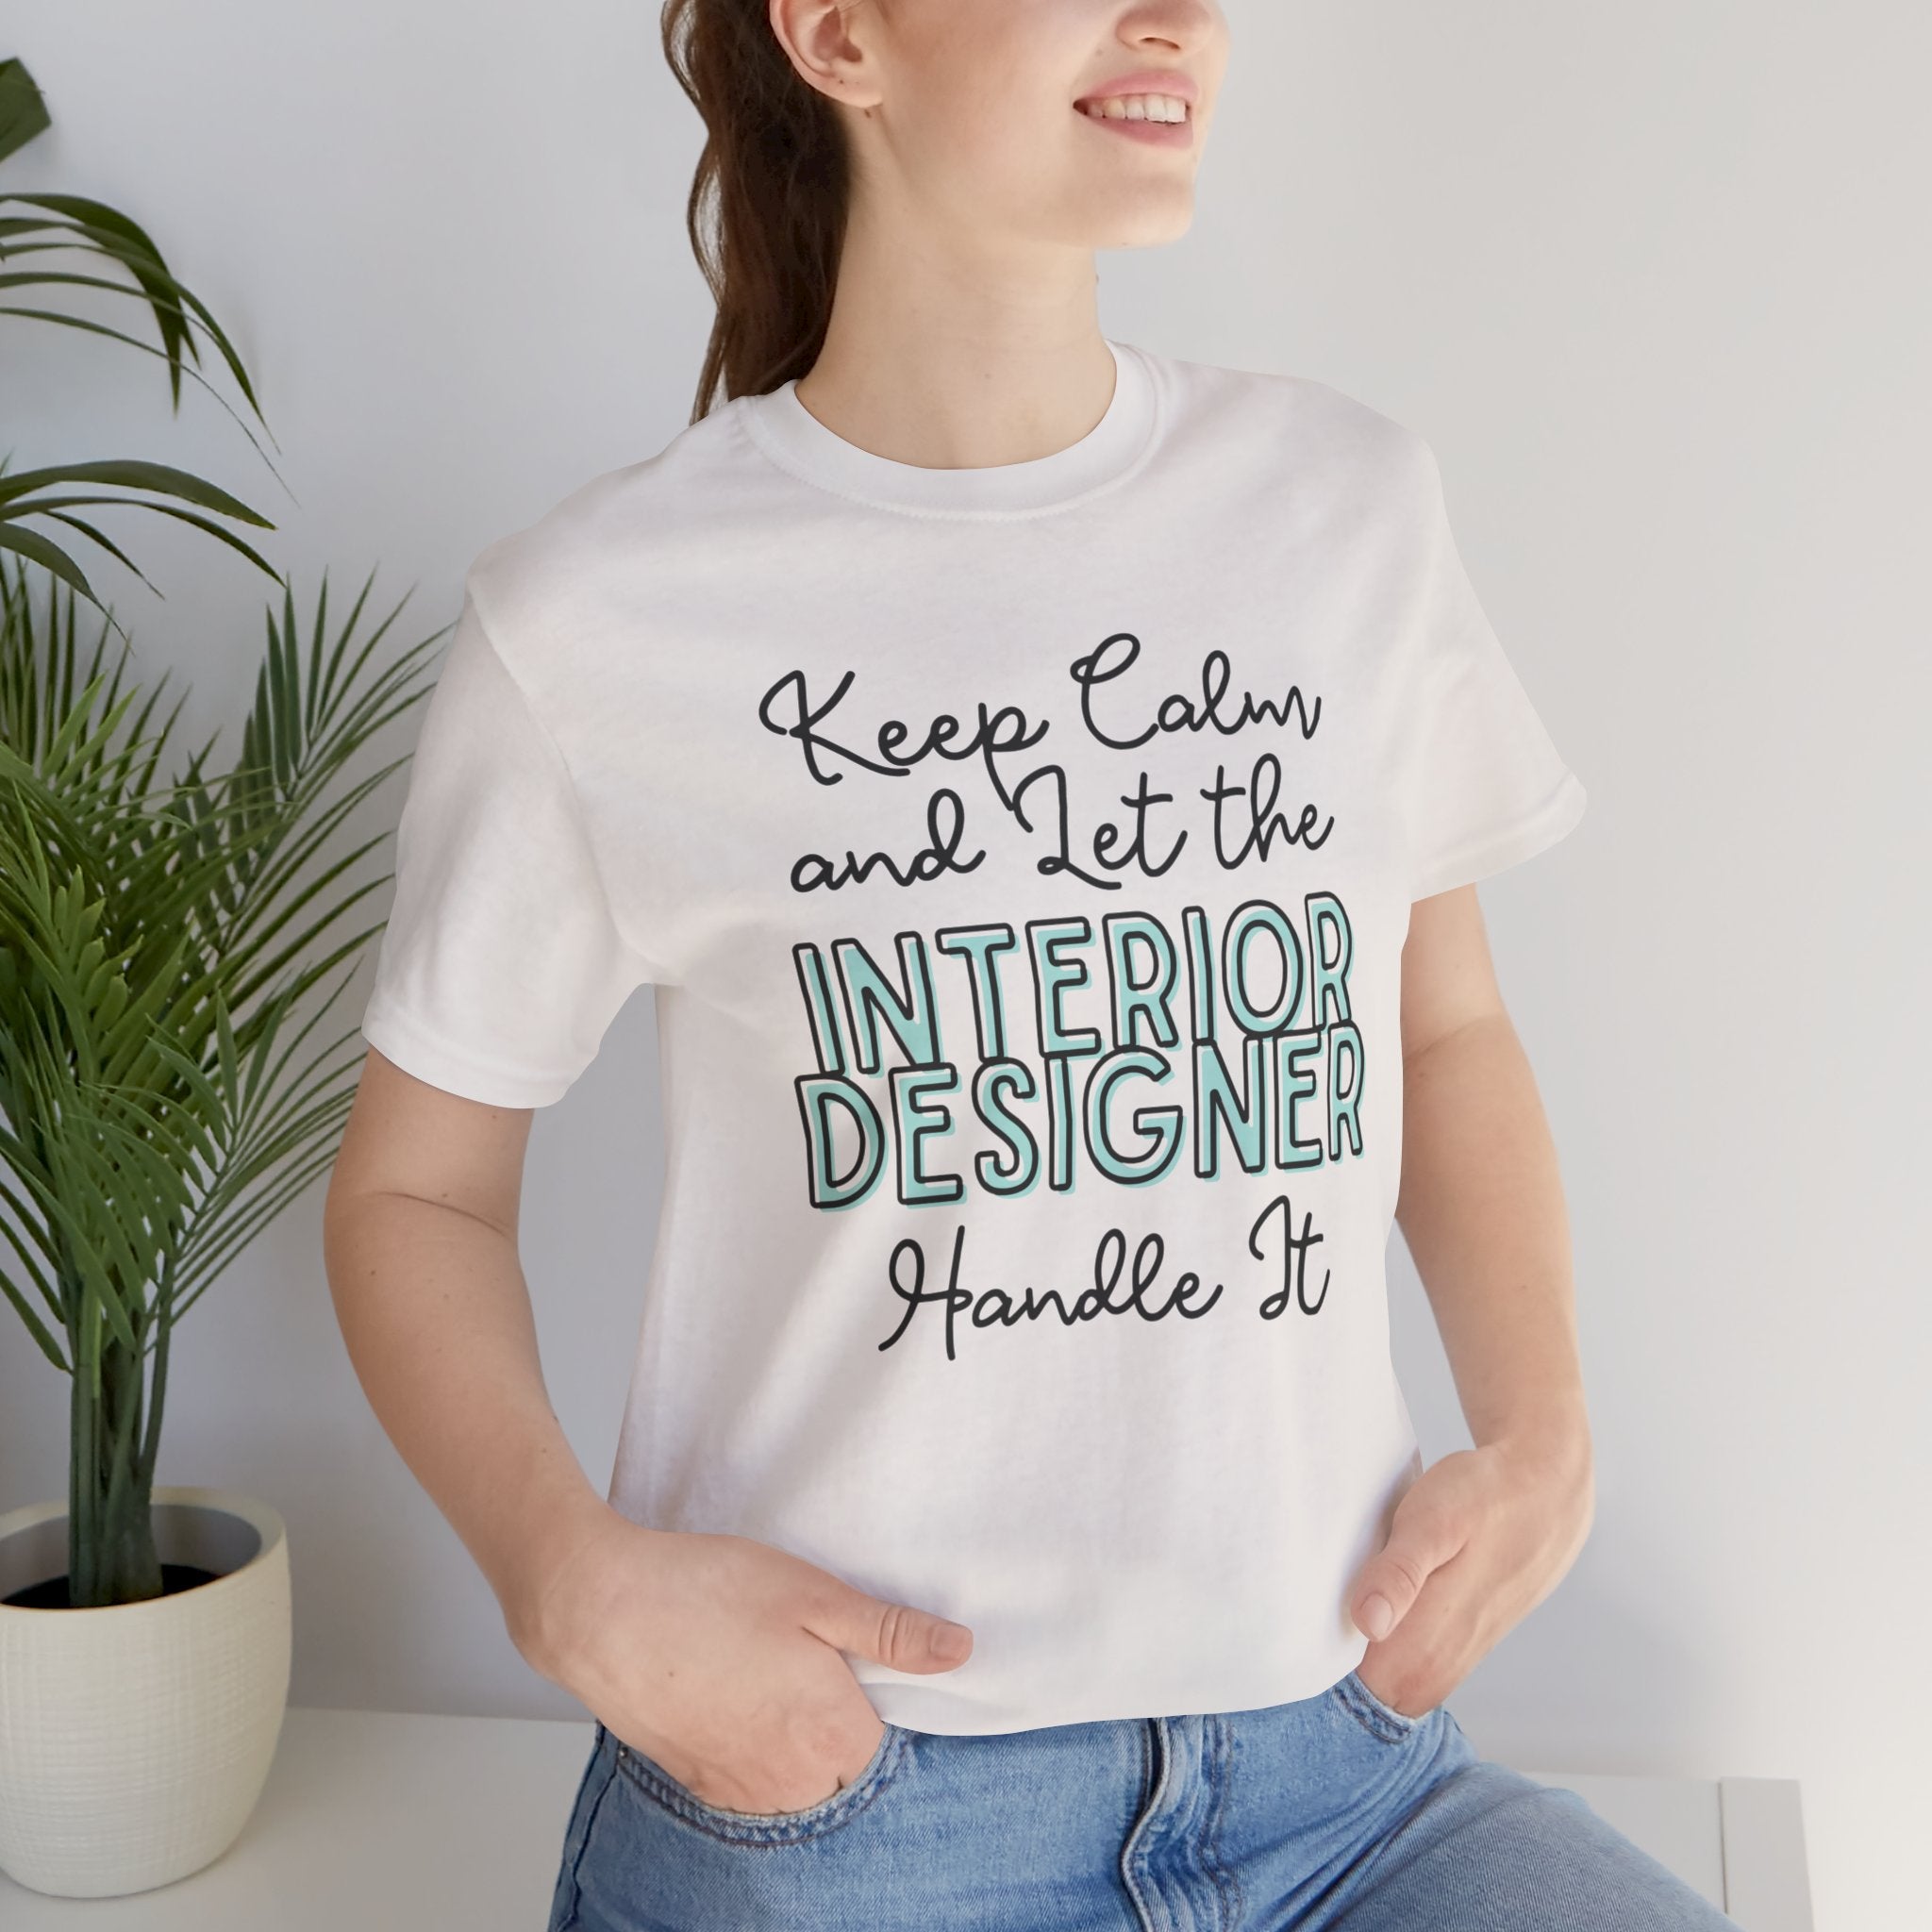 Keep Calm and let the Interior Designer handle It - Jersey Short Sleeve Tee